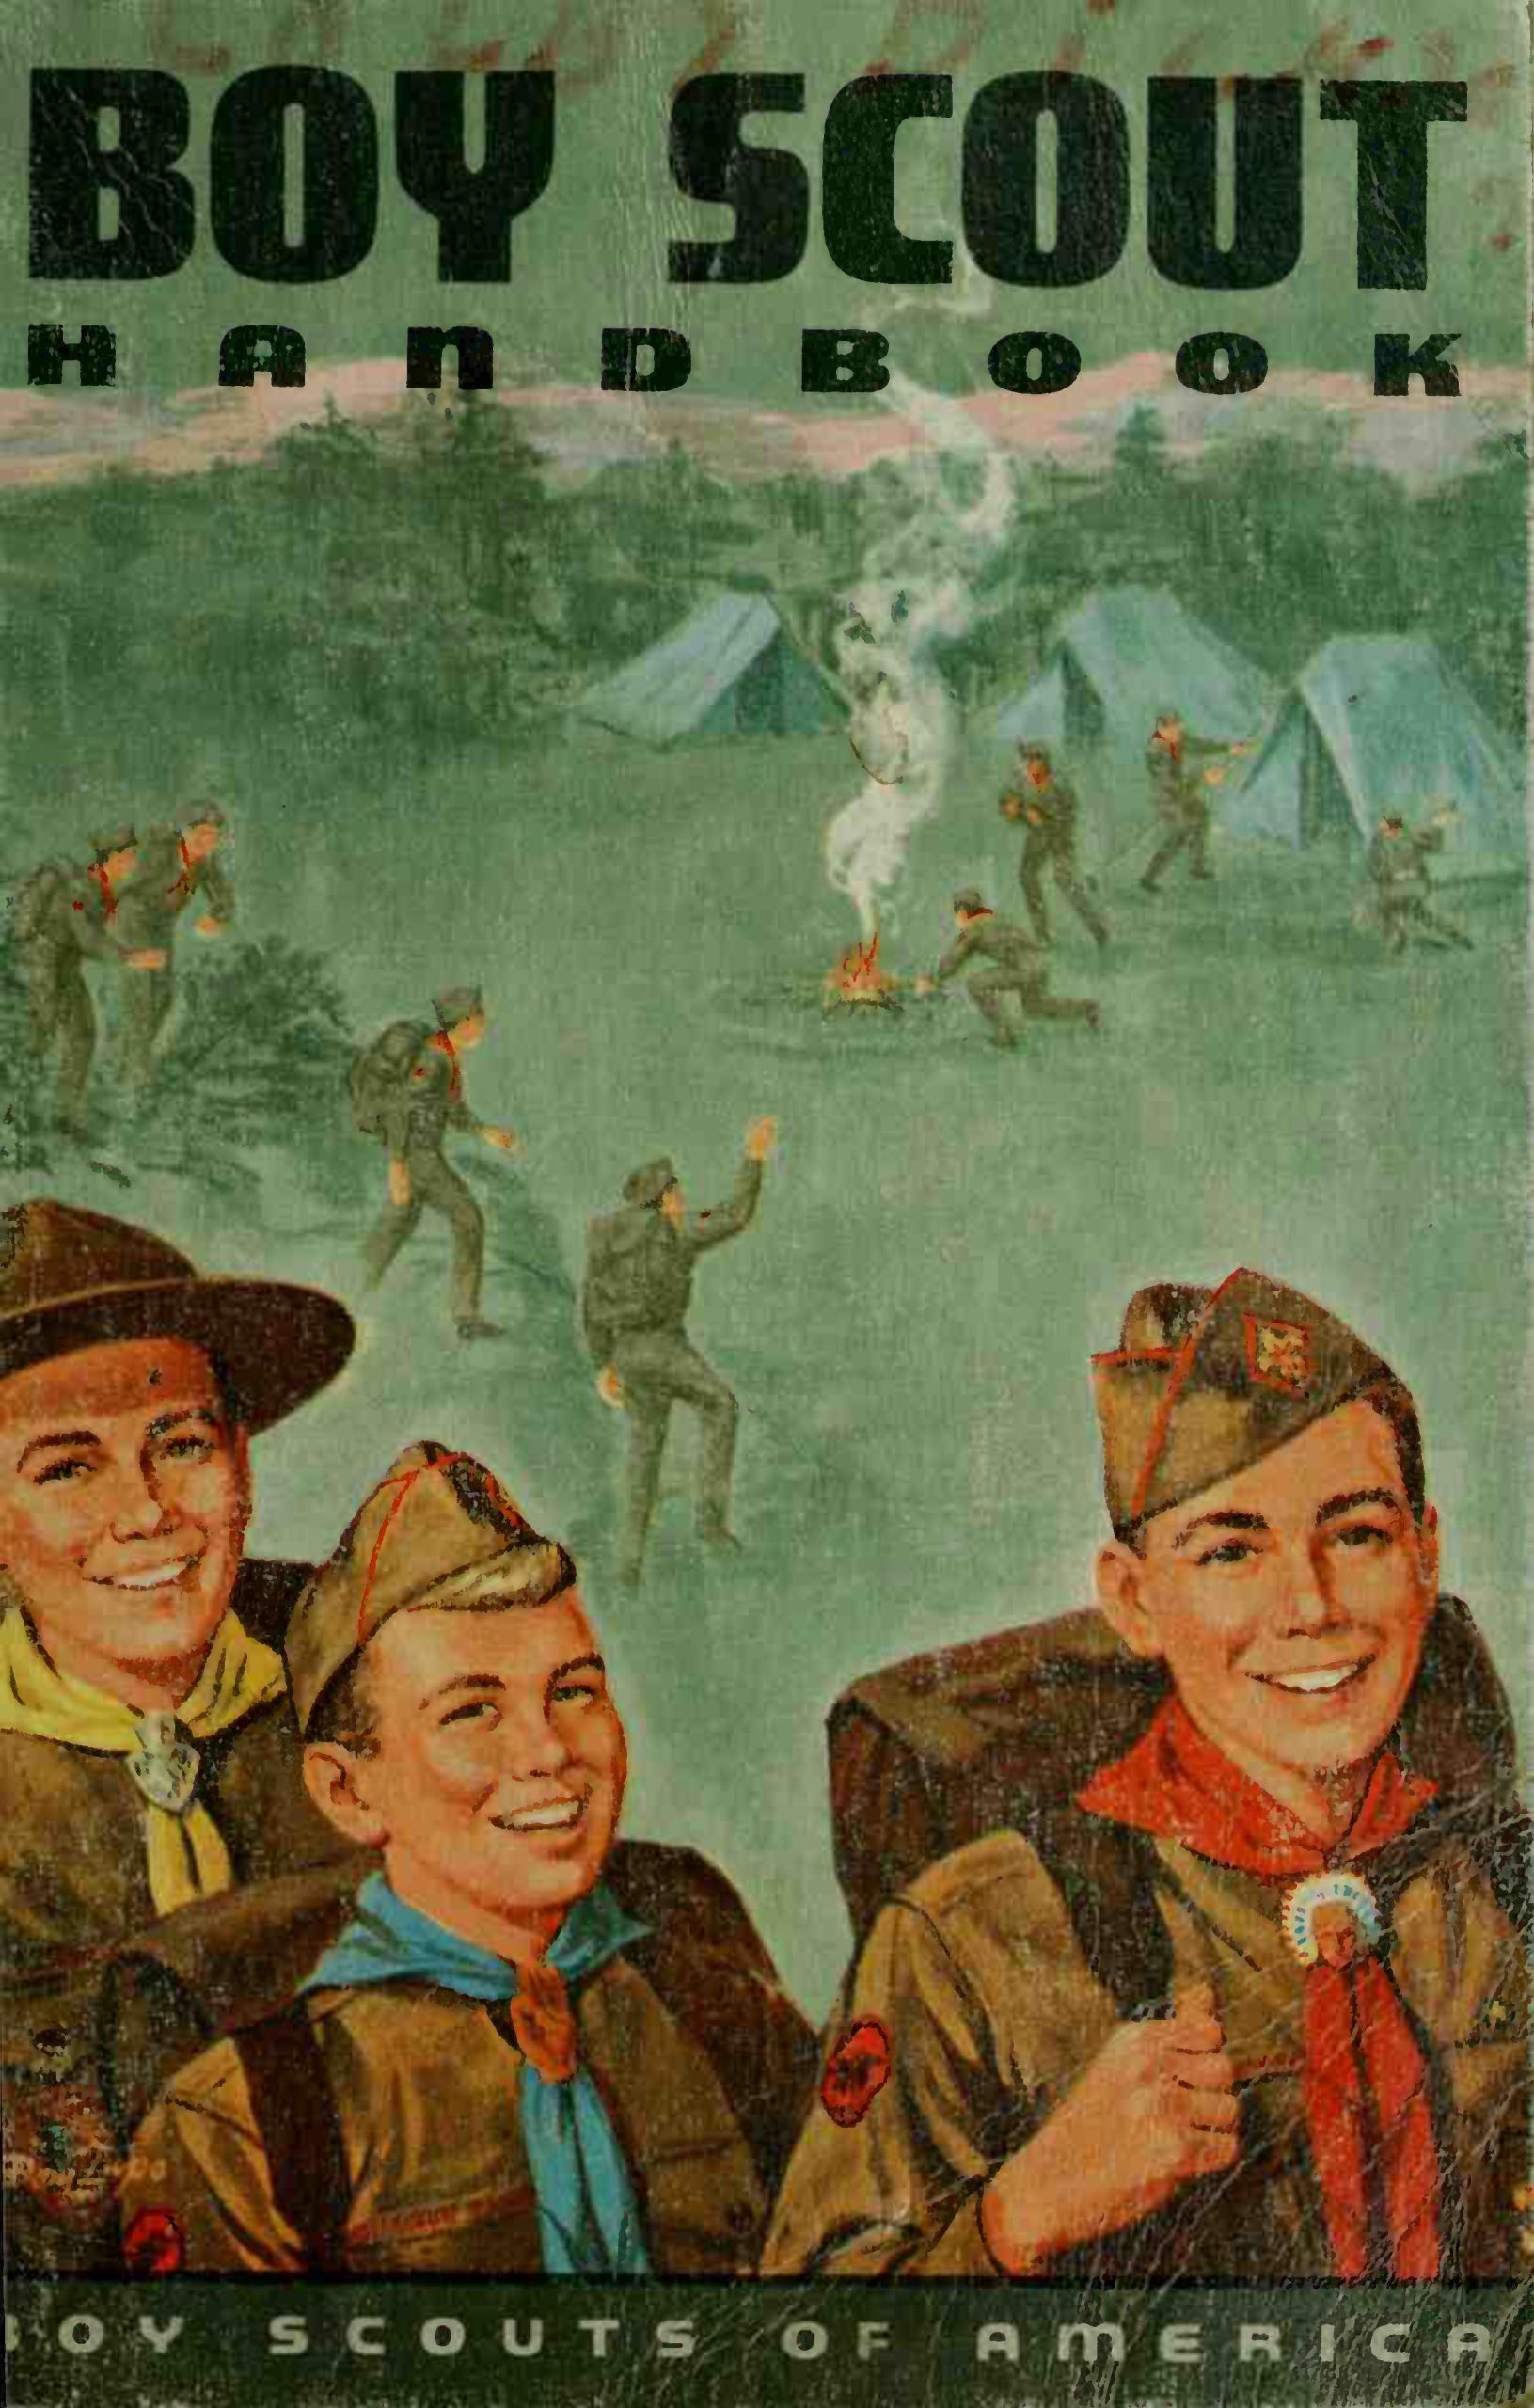 Complete Wilderness Training Manual (Boy Scouts of America): Hugh